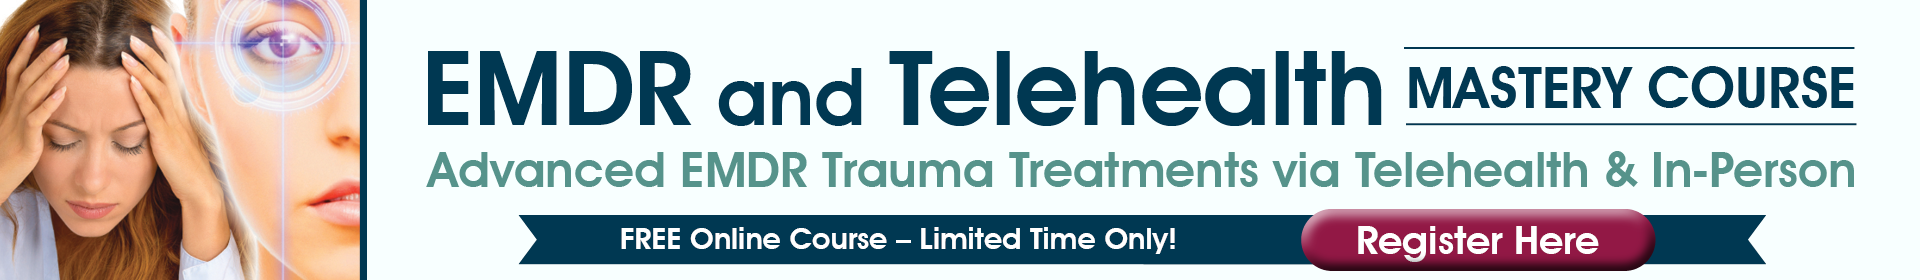 FREE Course! | EMDR and Telehealth Mastery Course